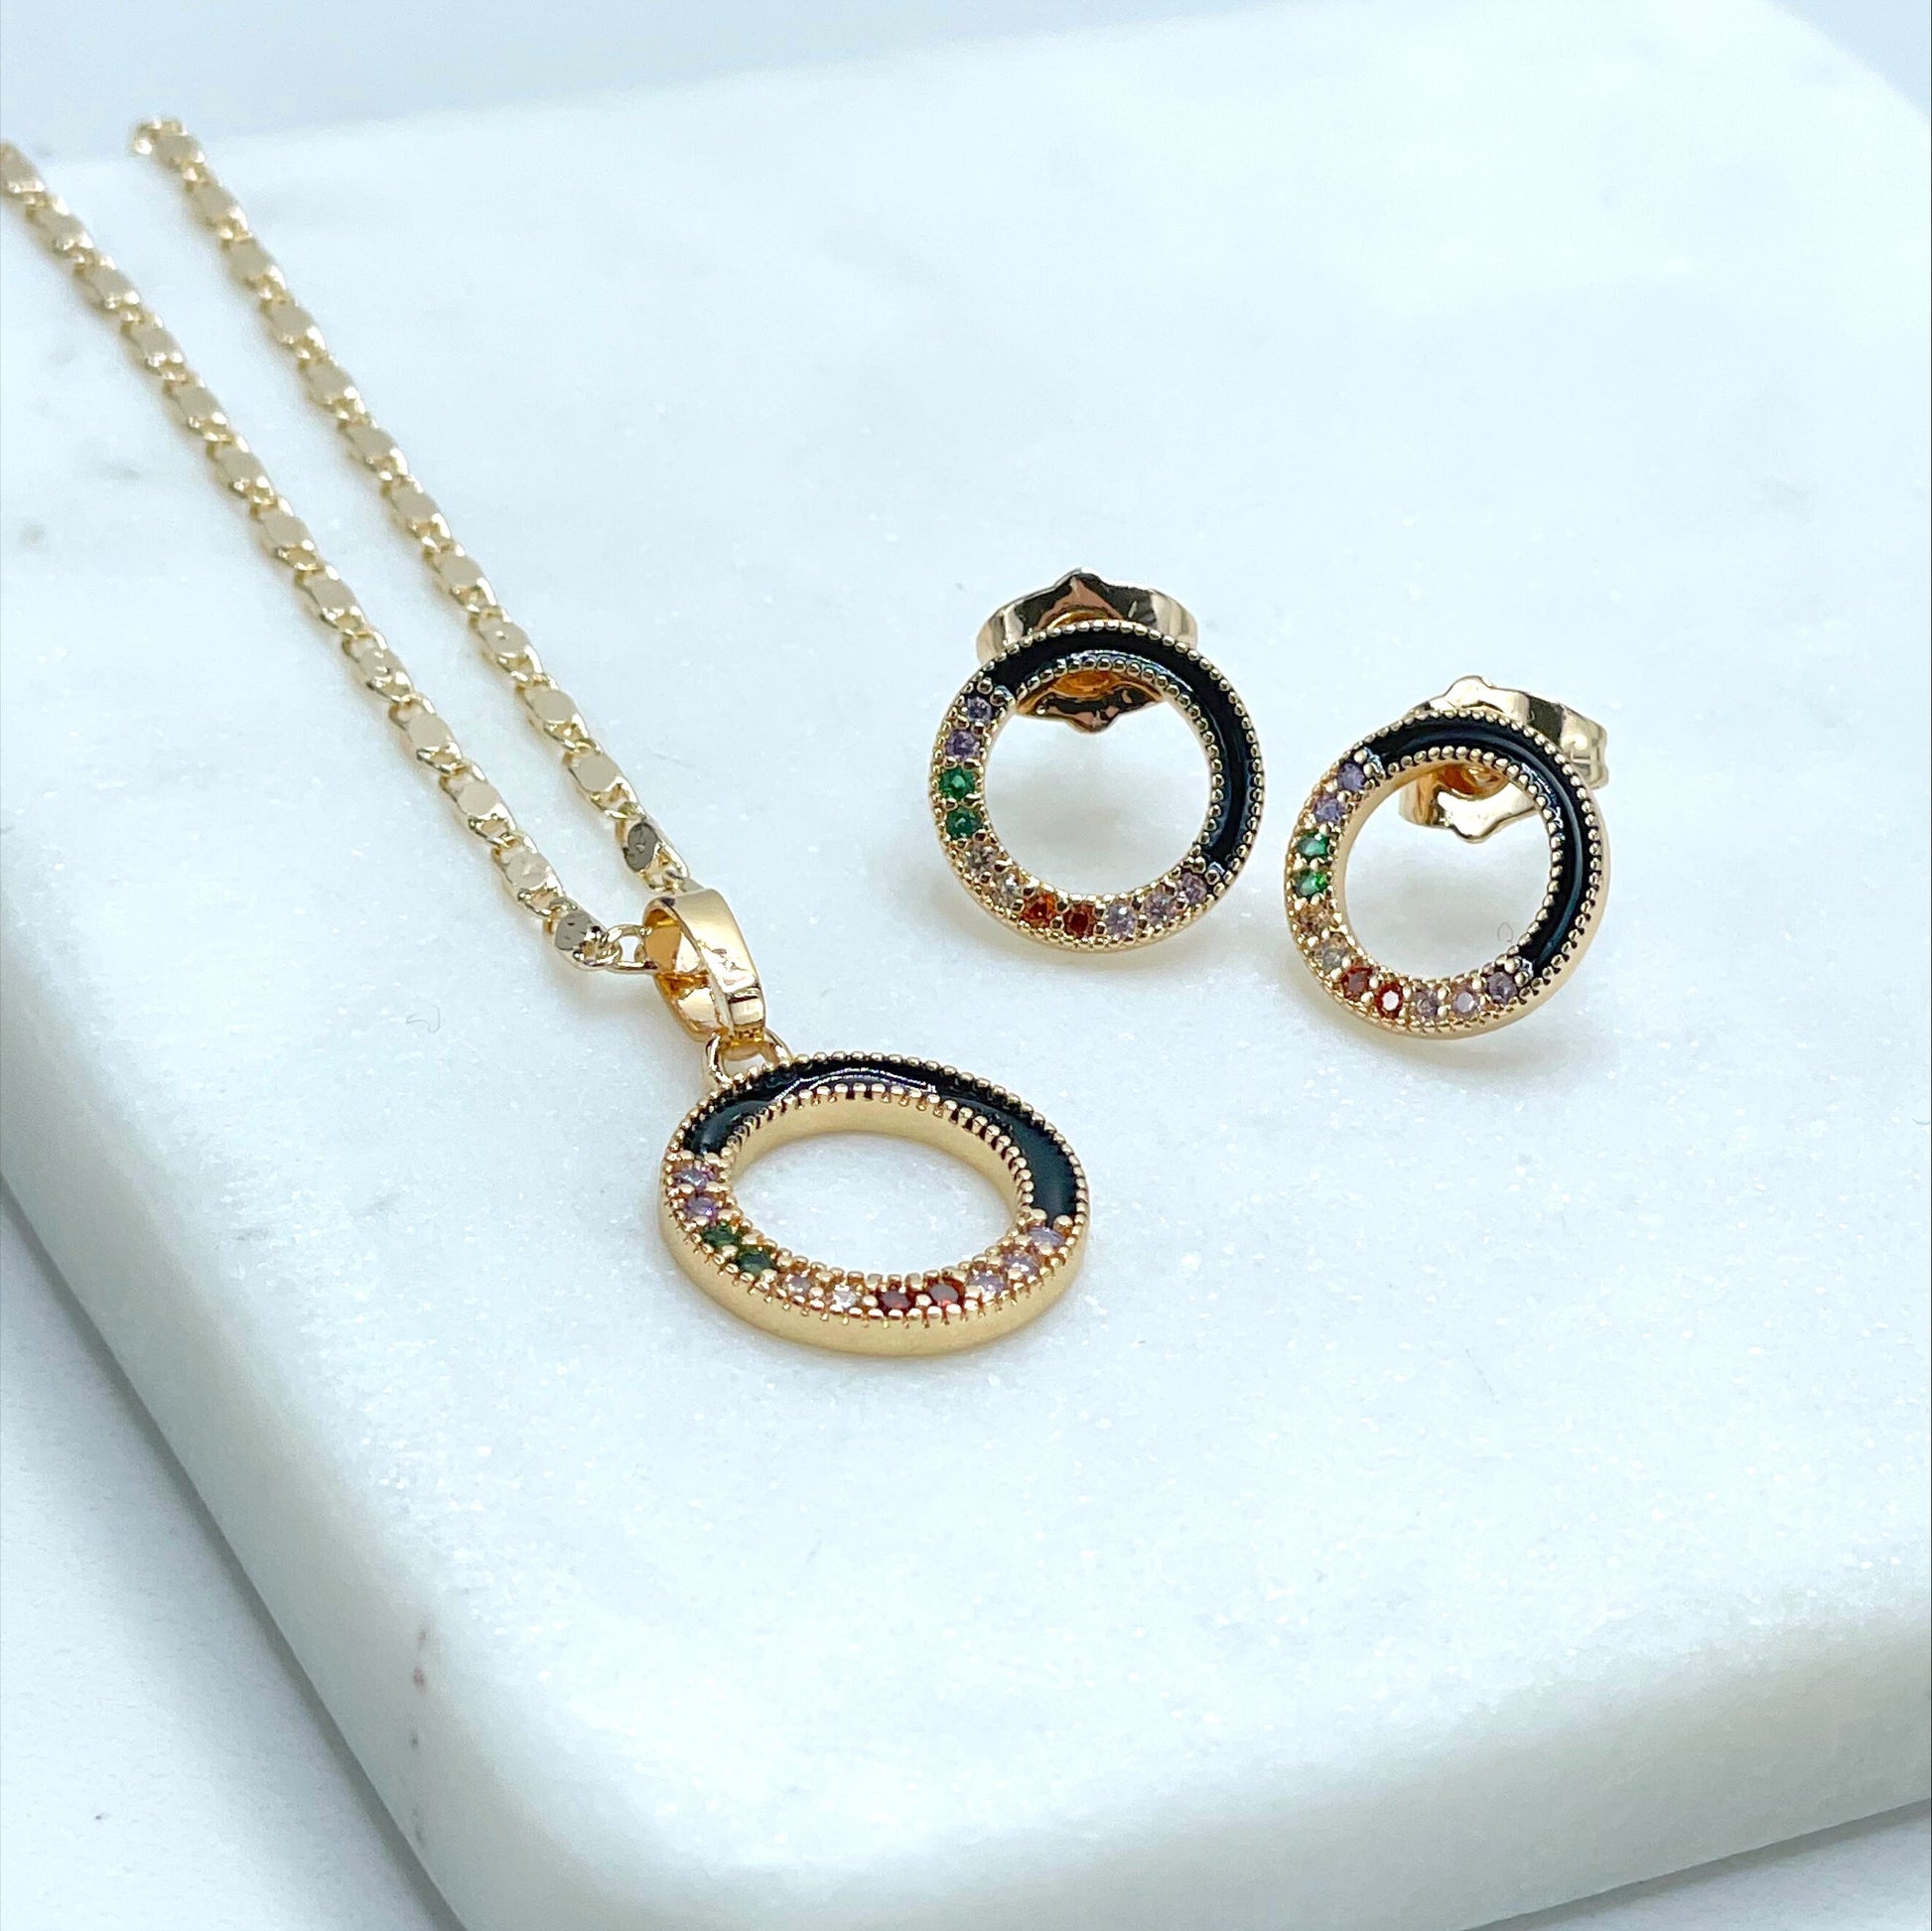 18k Gold Filled 1.5mm Mariner Link Chain with Colored Cubic Zirconia & Black Enamel Charms Necklace and Earrings Set, Wholesale Jewelry